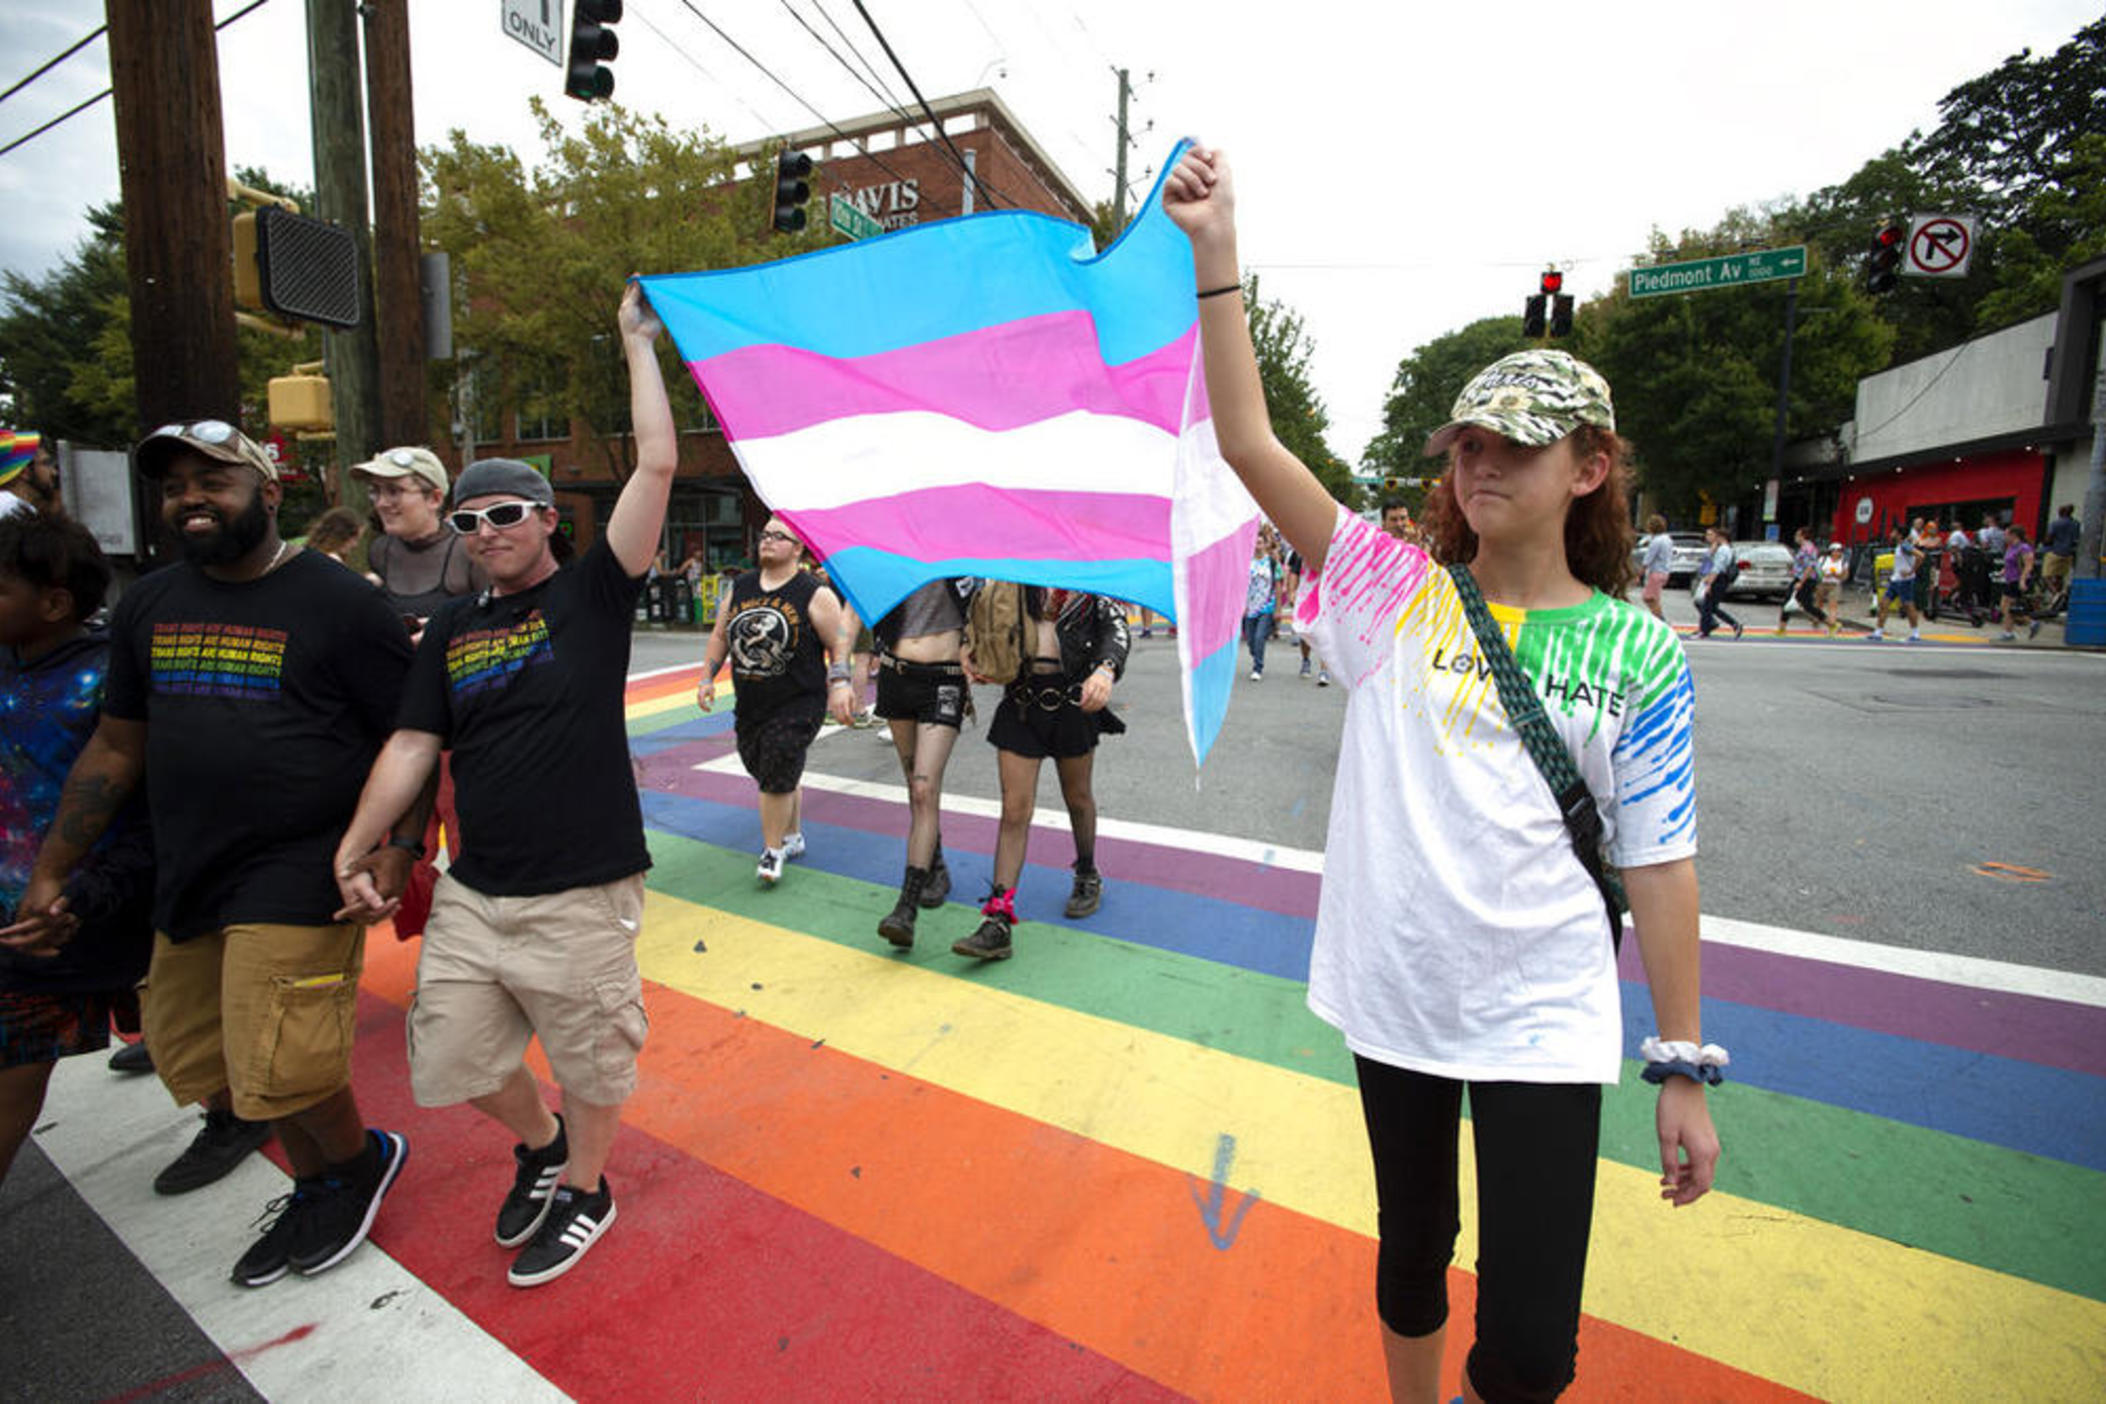 Supporters of Georgia's transgender and nonbinary community march in Atlanta in October 2019, part of the larger Atlanta Pride weekend festivities. This year's Pride events have been cancelled due to the COVID-19 pandemic.